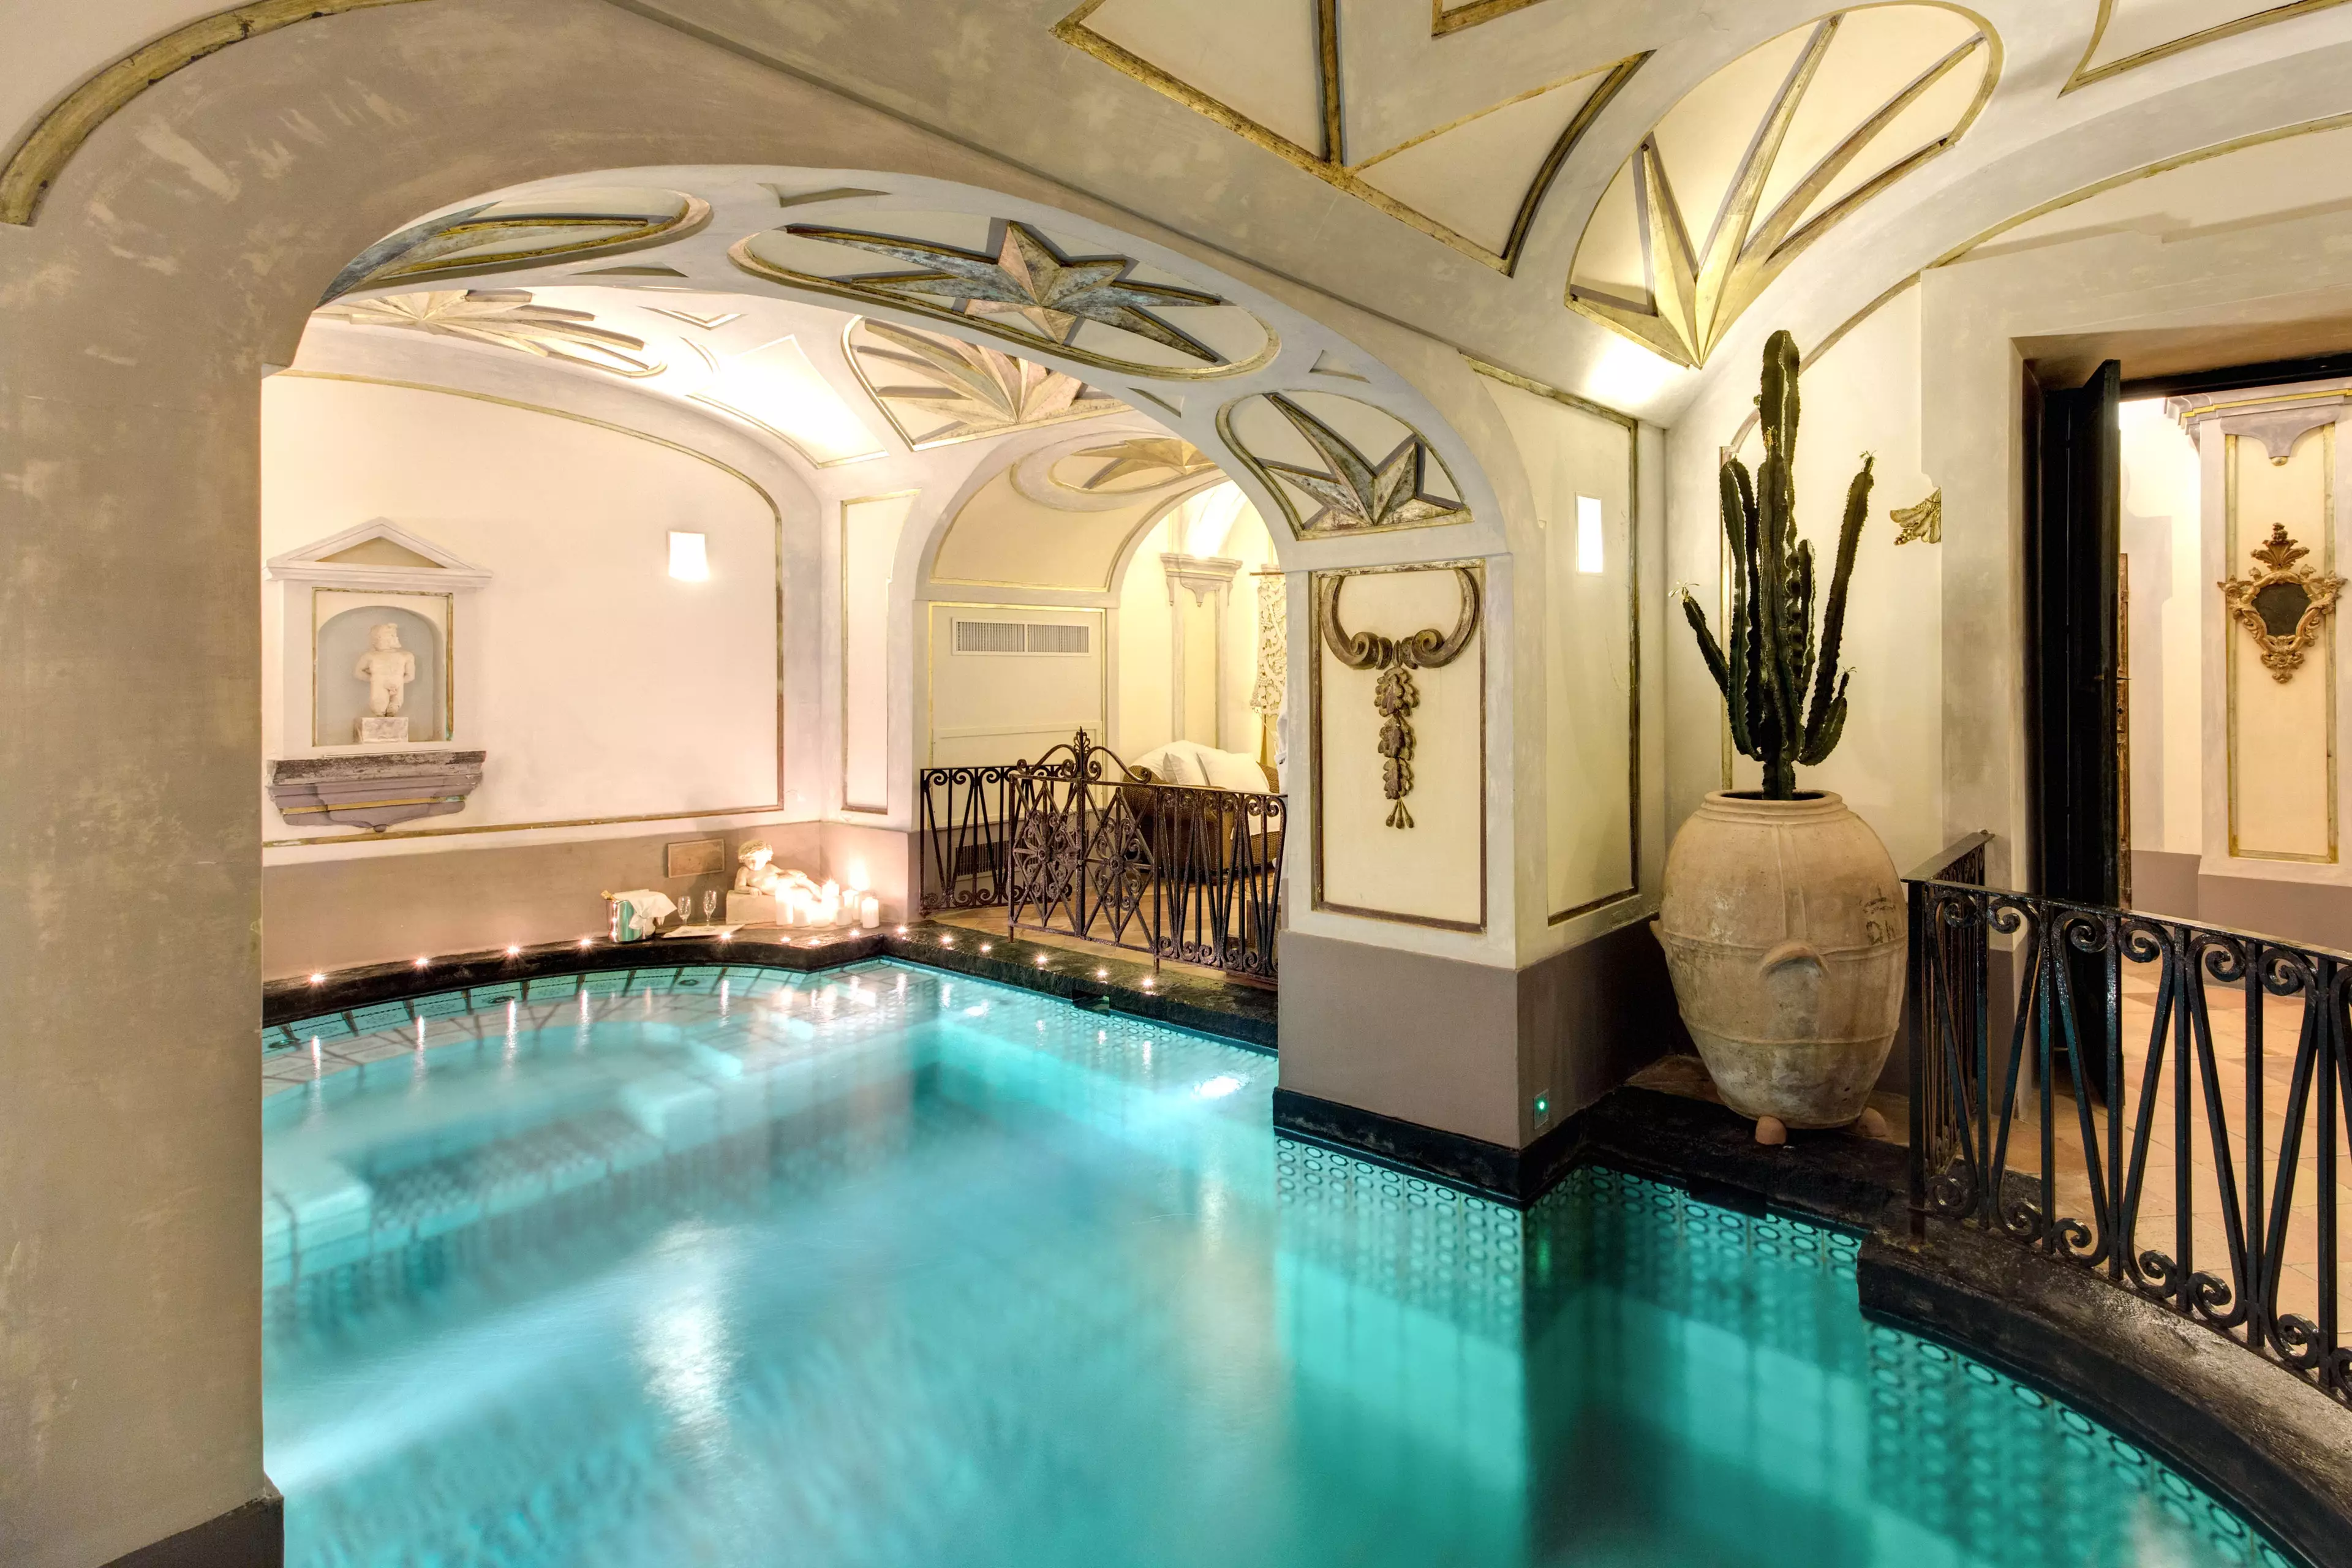 It comes complete with indoor pool, plus indoor and outdoor jacuzzis (